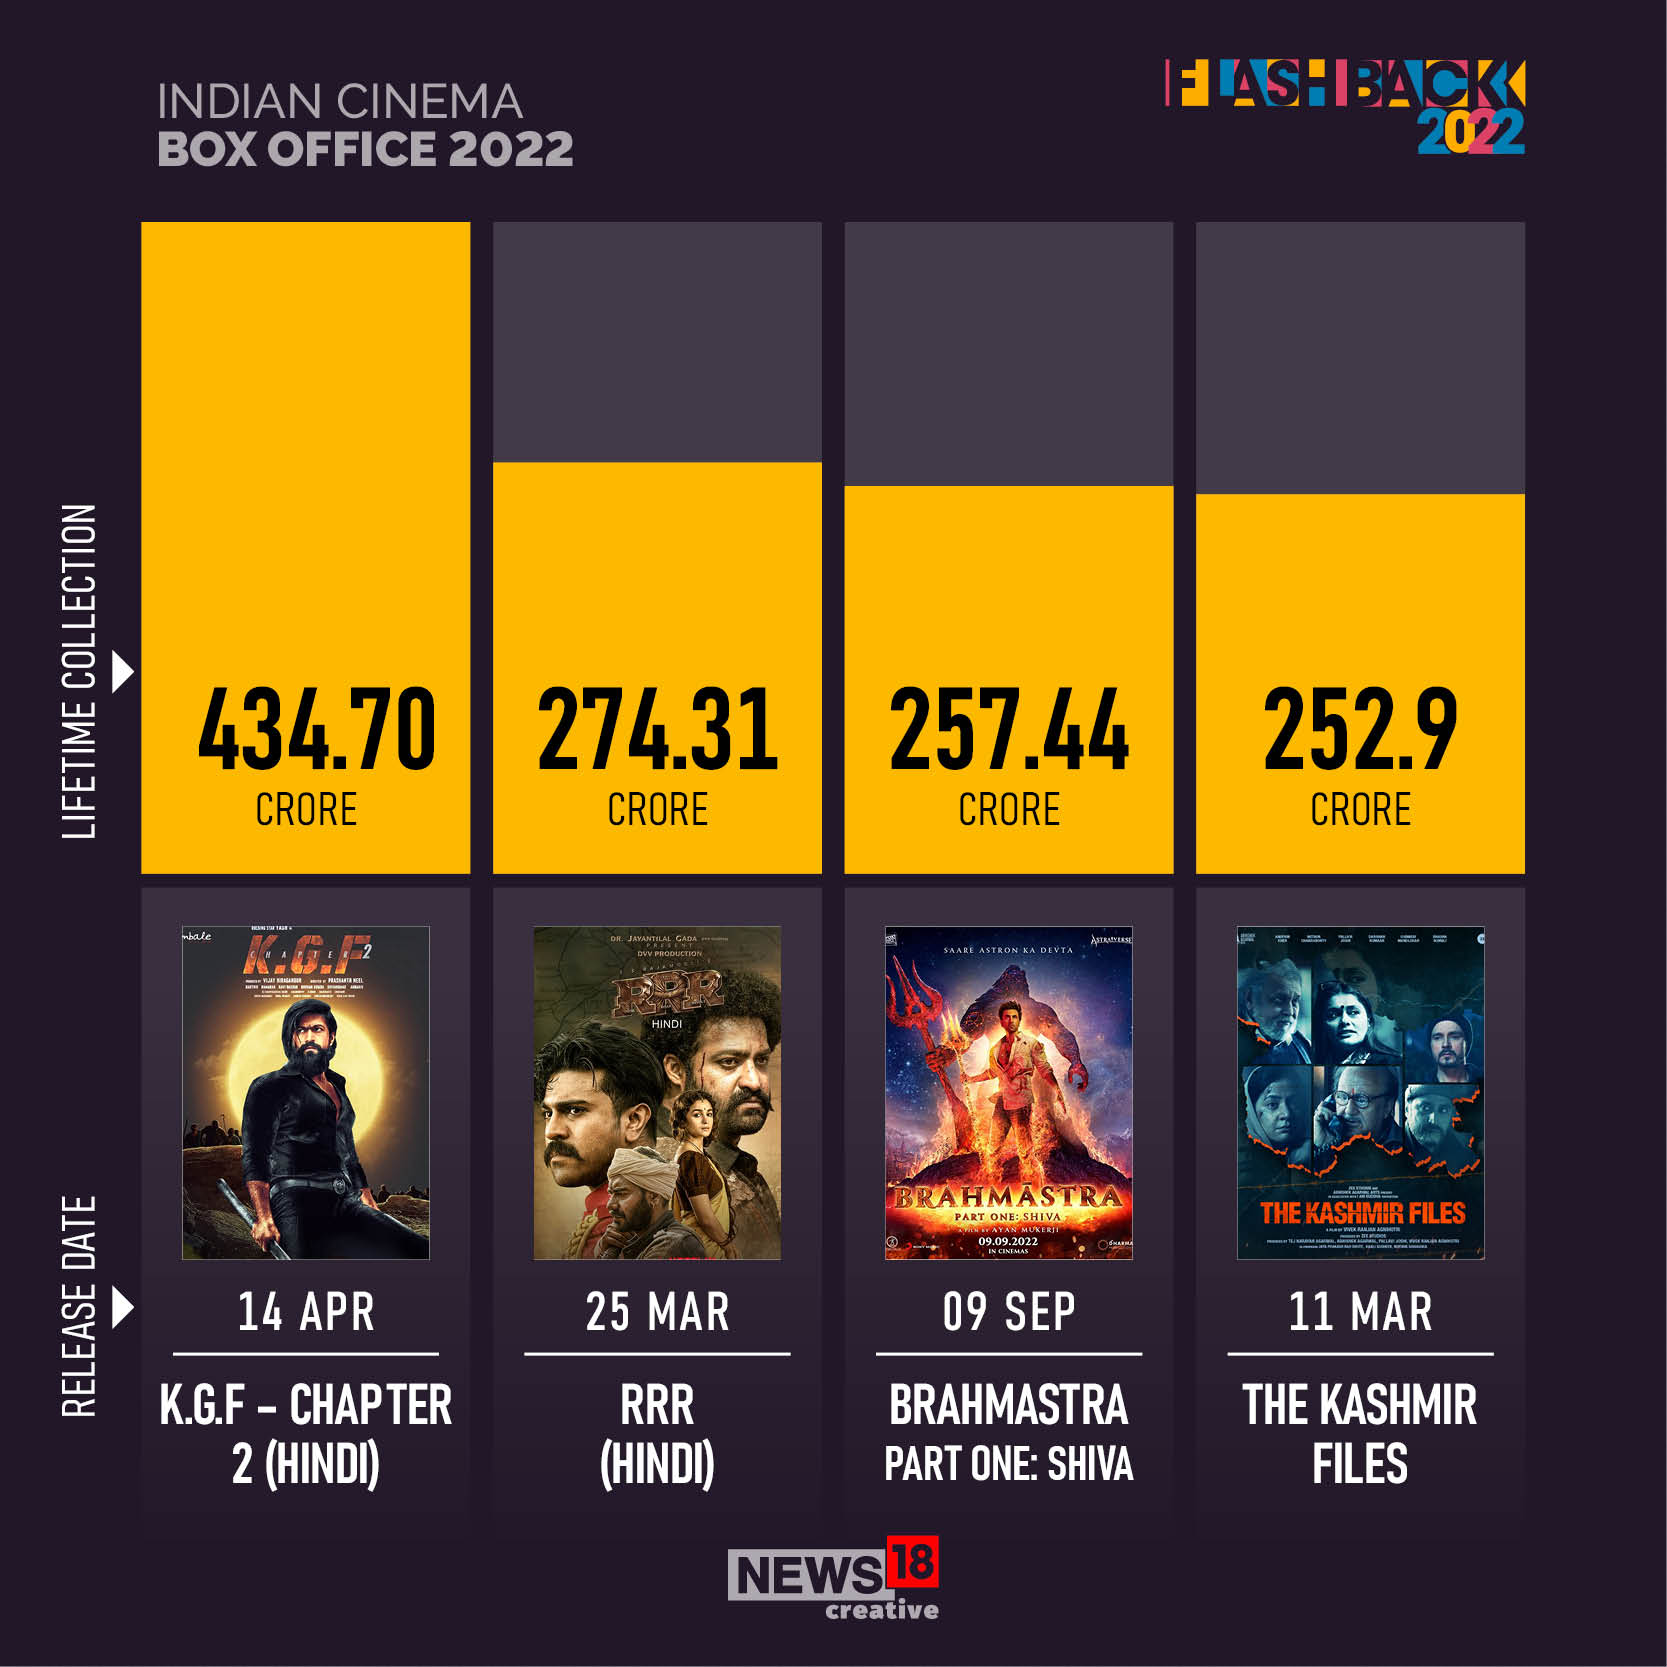 From 'KGF - Chapter 2' to 'Kantara' and more, here's how Indian cinema fared at the box office